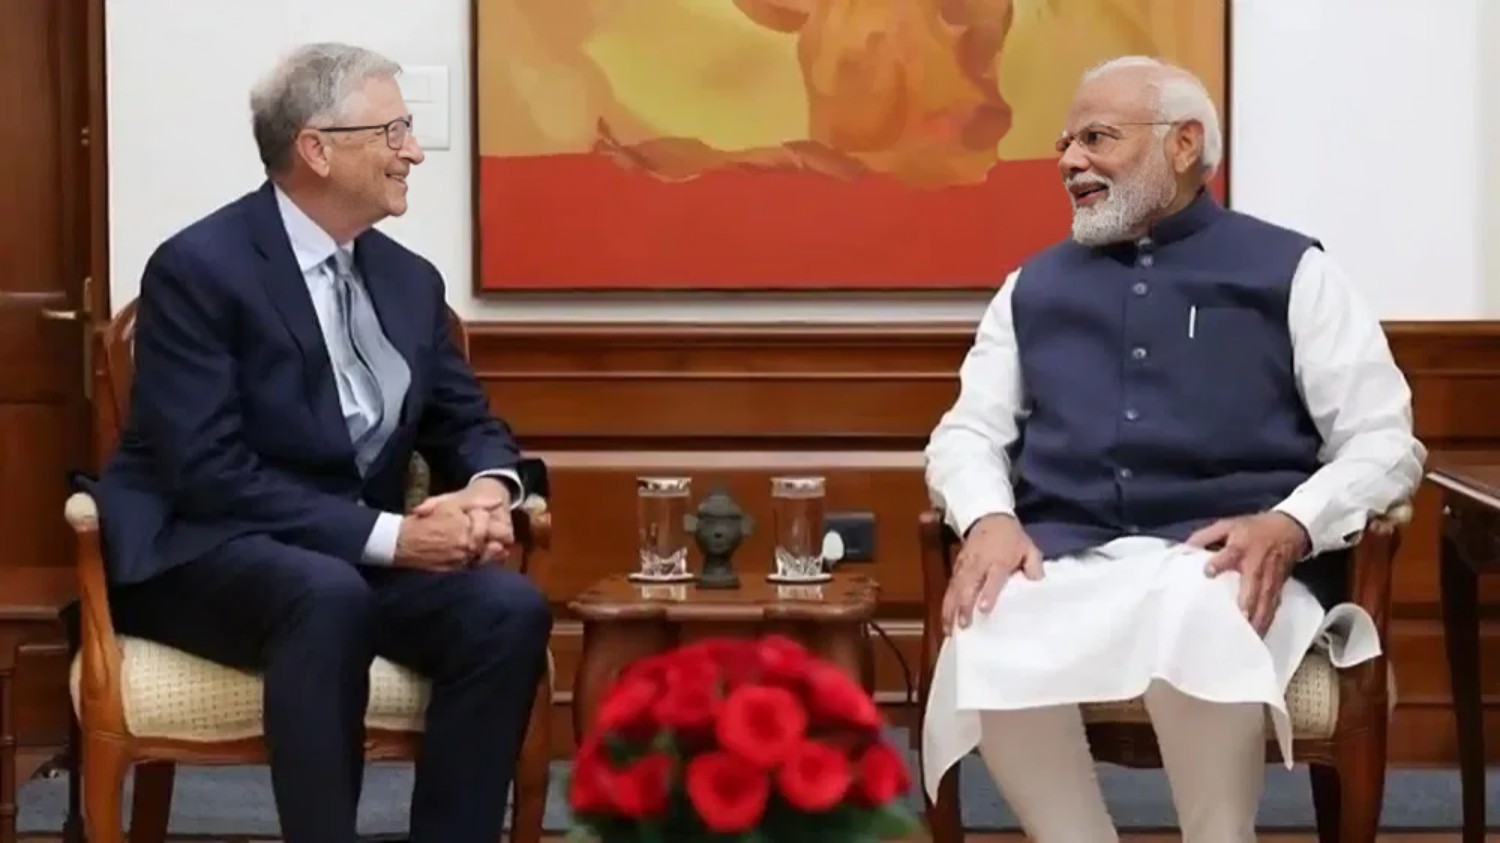 Prime Minister Narendra Modi spoke in Hindi, Bill Gates does not know Hindi language, know how to communicate की तस्वीर